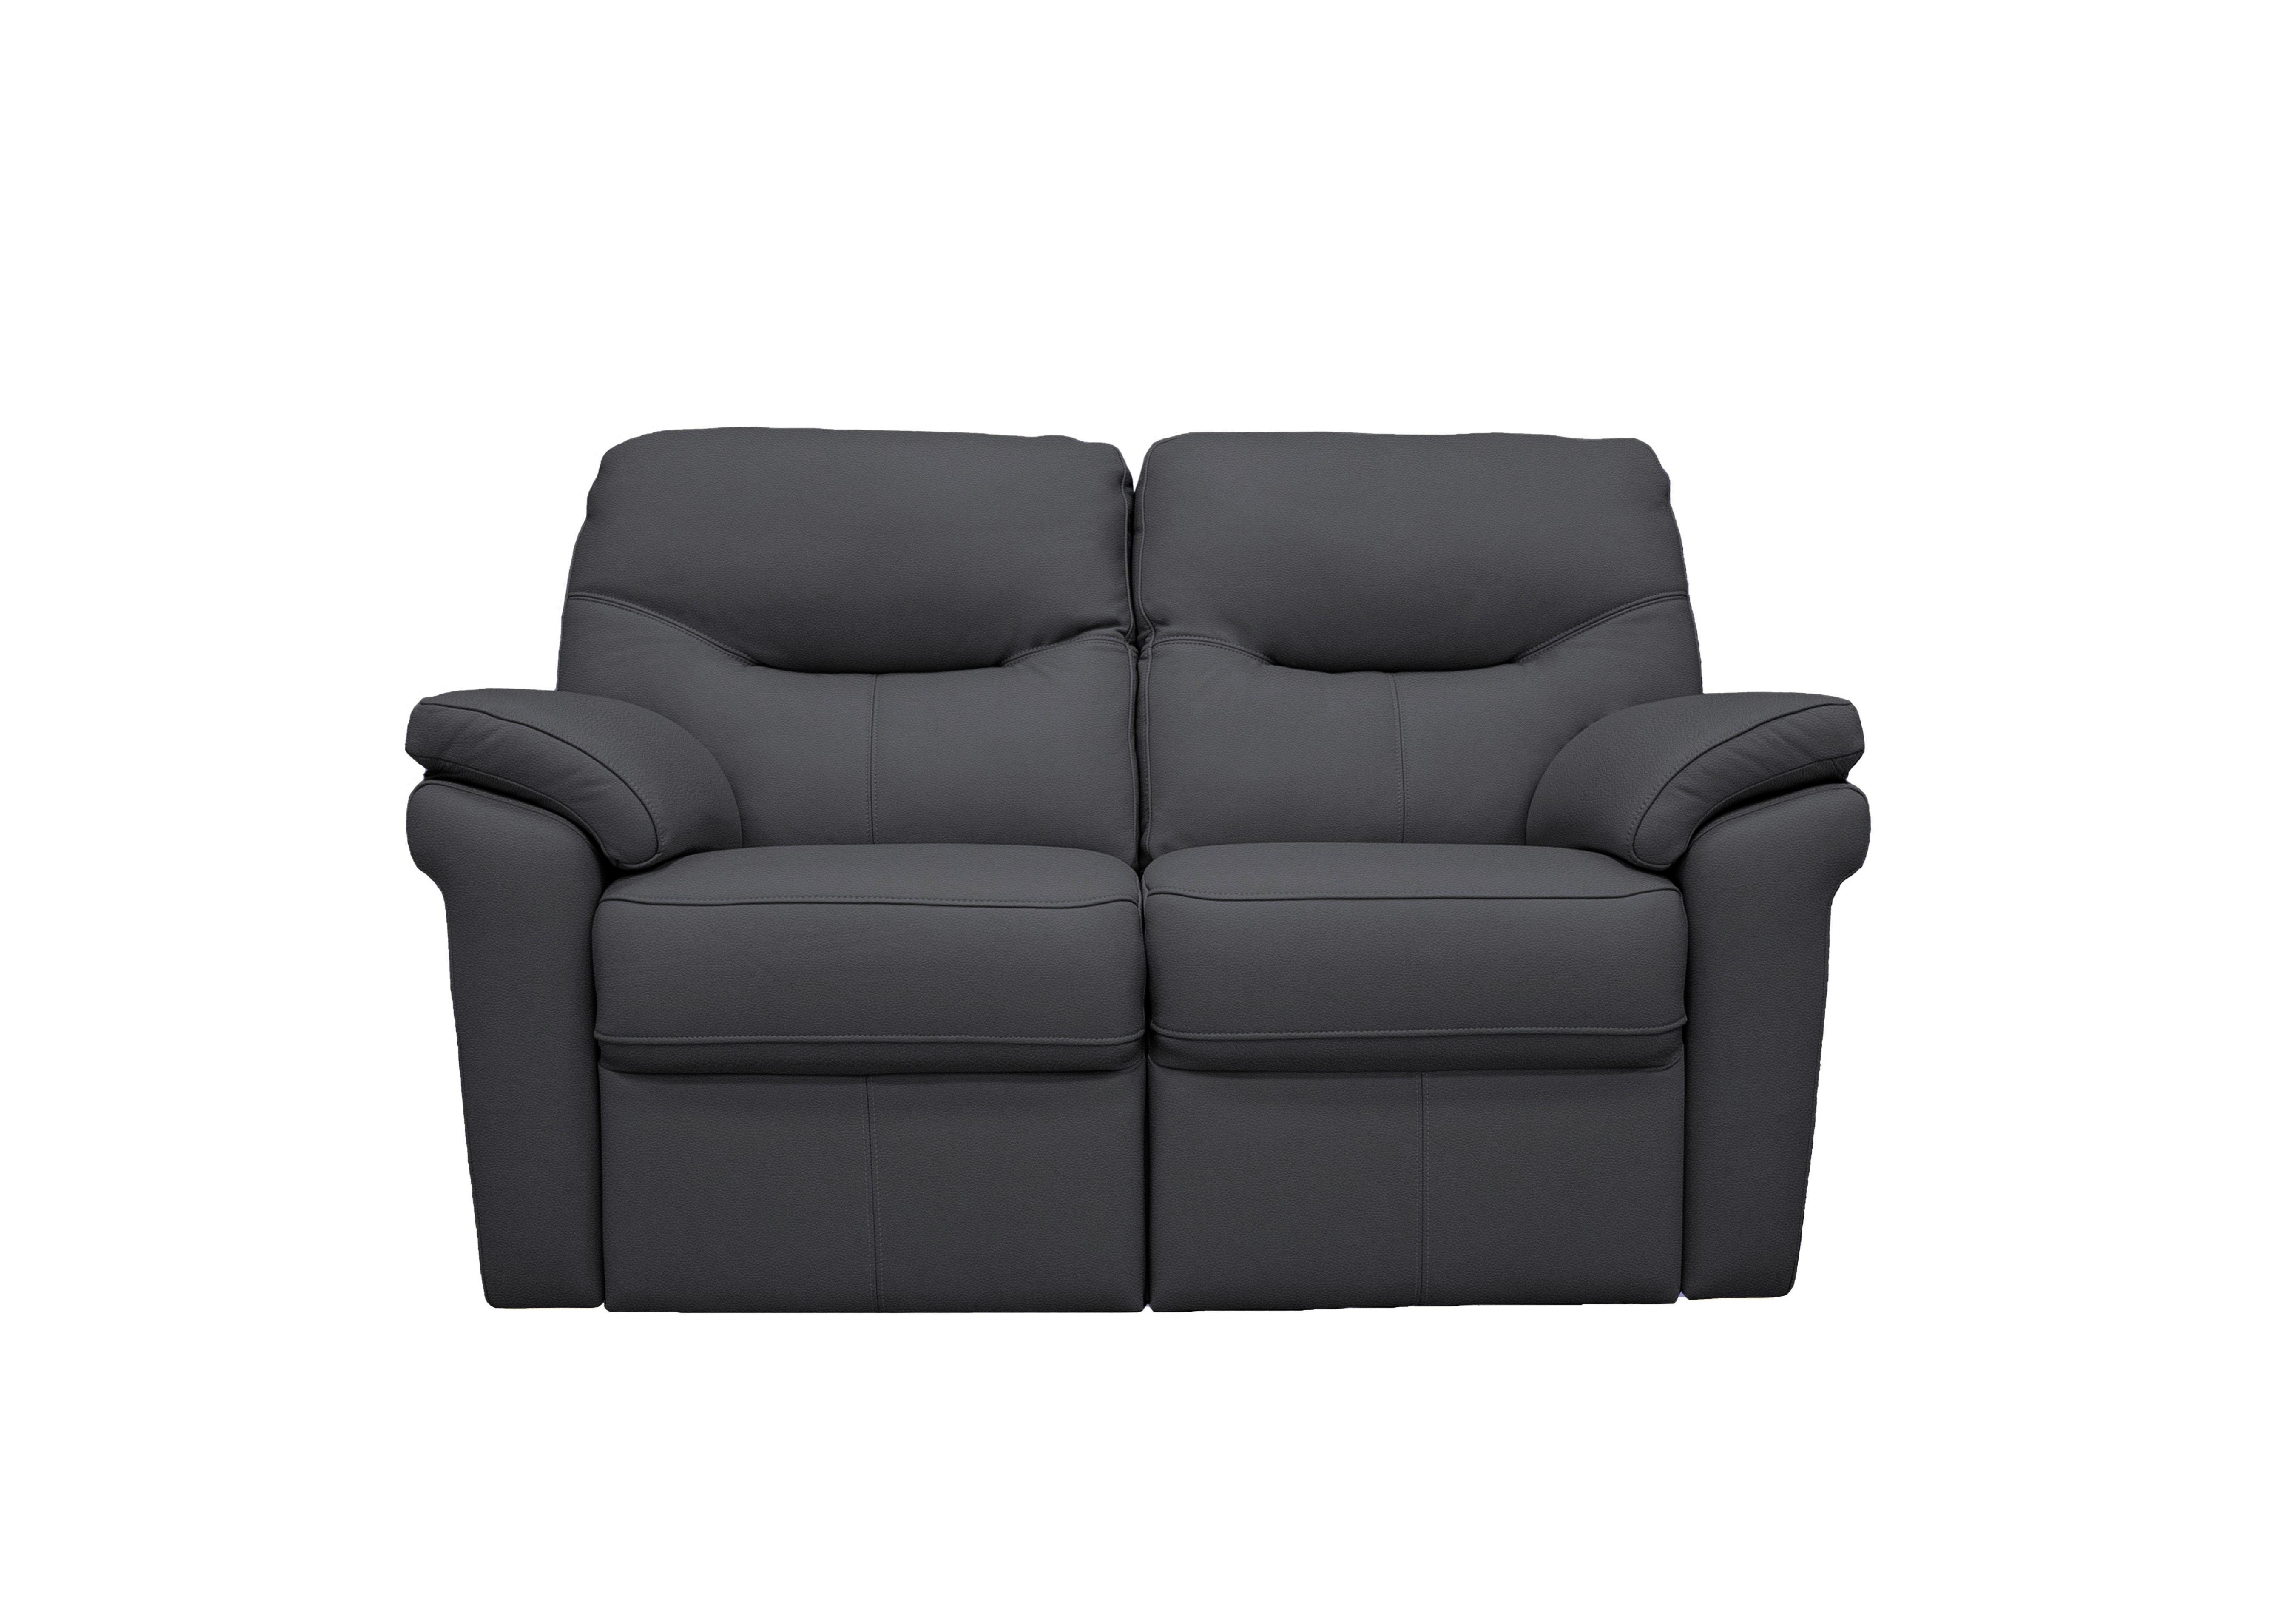 Seattle 2 Seater Leather Power Recliner Sofa with Power Lumbar in L852 Cambridge Petrol Blue on Furniture Village